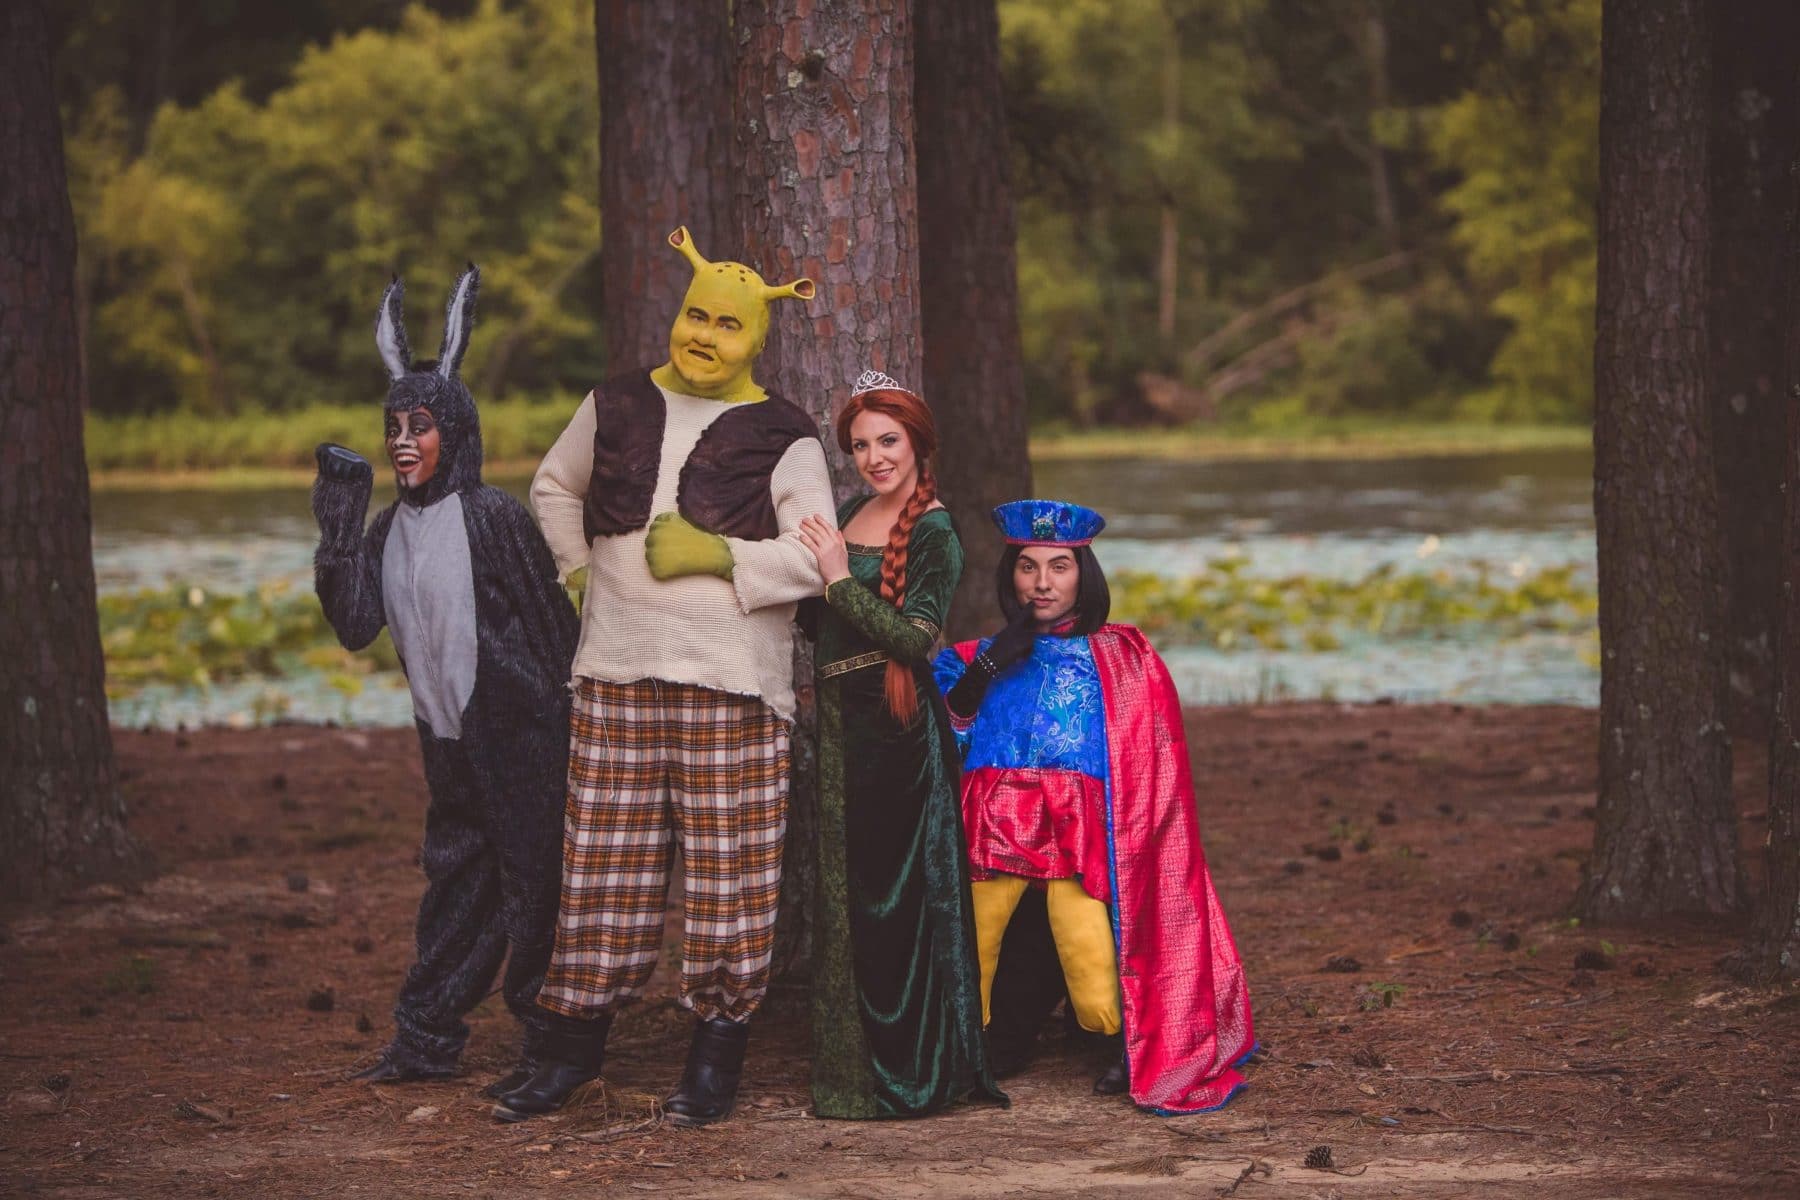 Pictured in RCT Shrek 1 (left to right): Adeeja Rochele' (Little Rock) as Donkey, Joshua Steen (Corinth, MS) as Shrek, Cesiley Trevino (Little Rock) as Princess Fiona, and Daniel Cathers (Conway) as Lord Farquaad